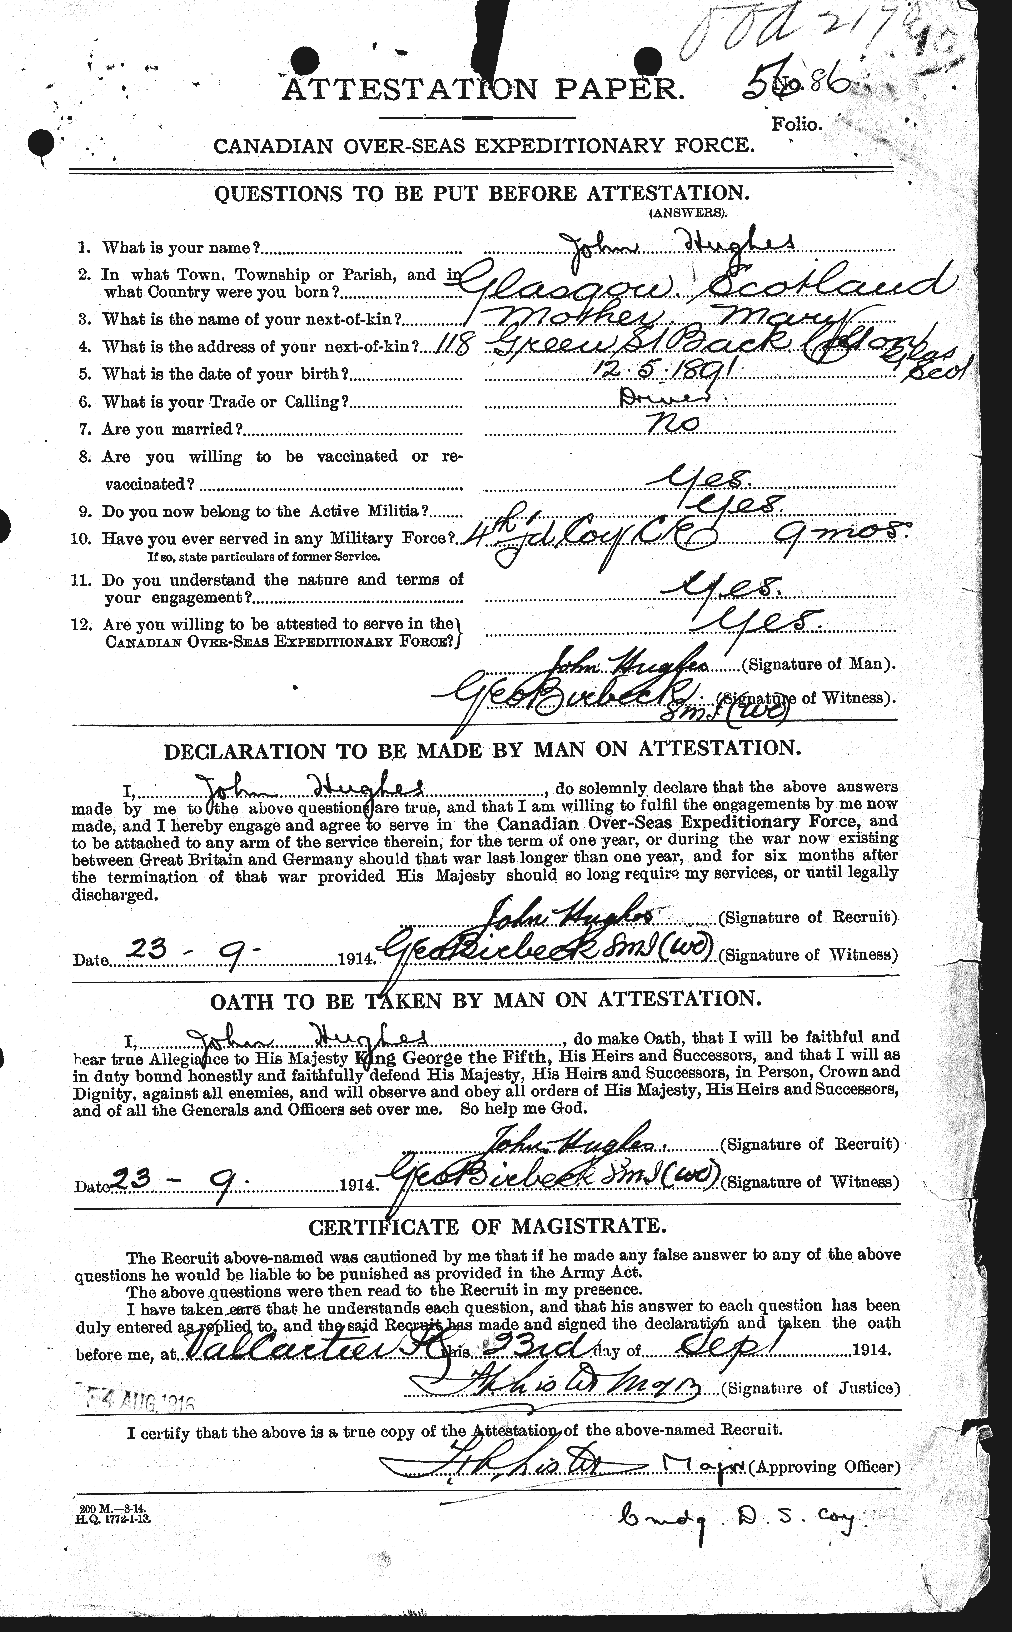 Personnel Records of the First World War - CEF 404002a